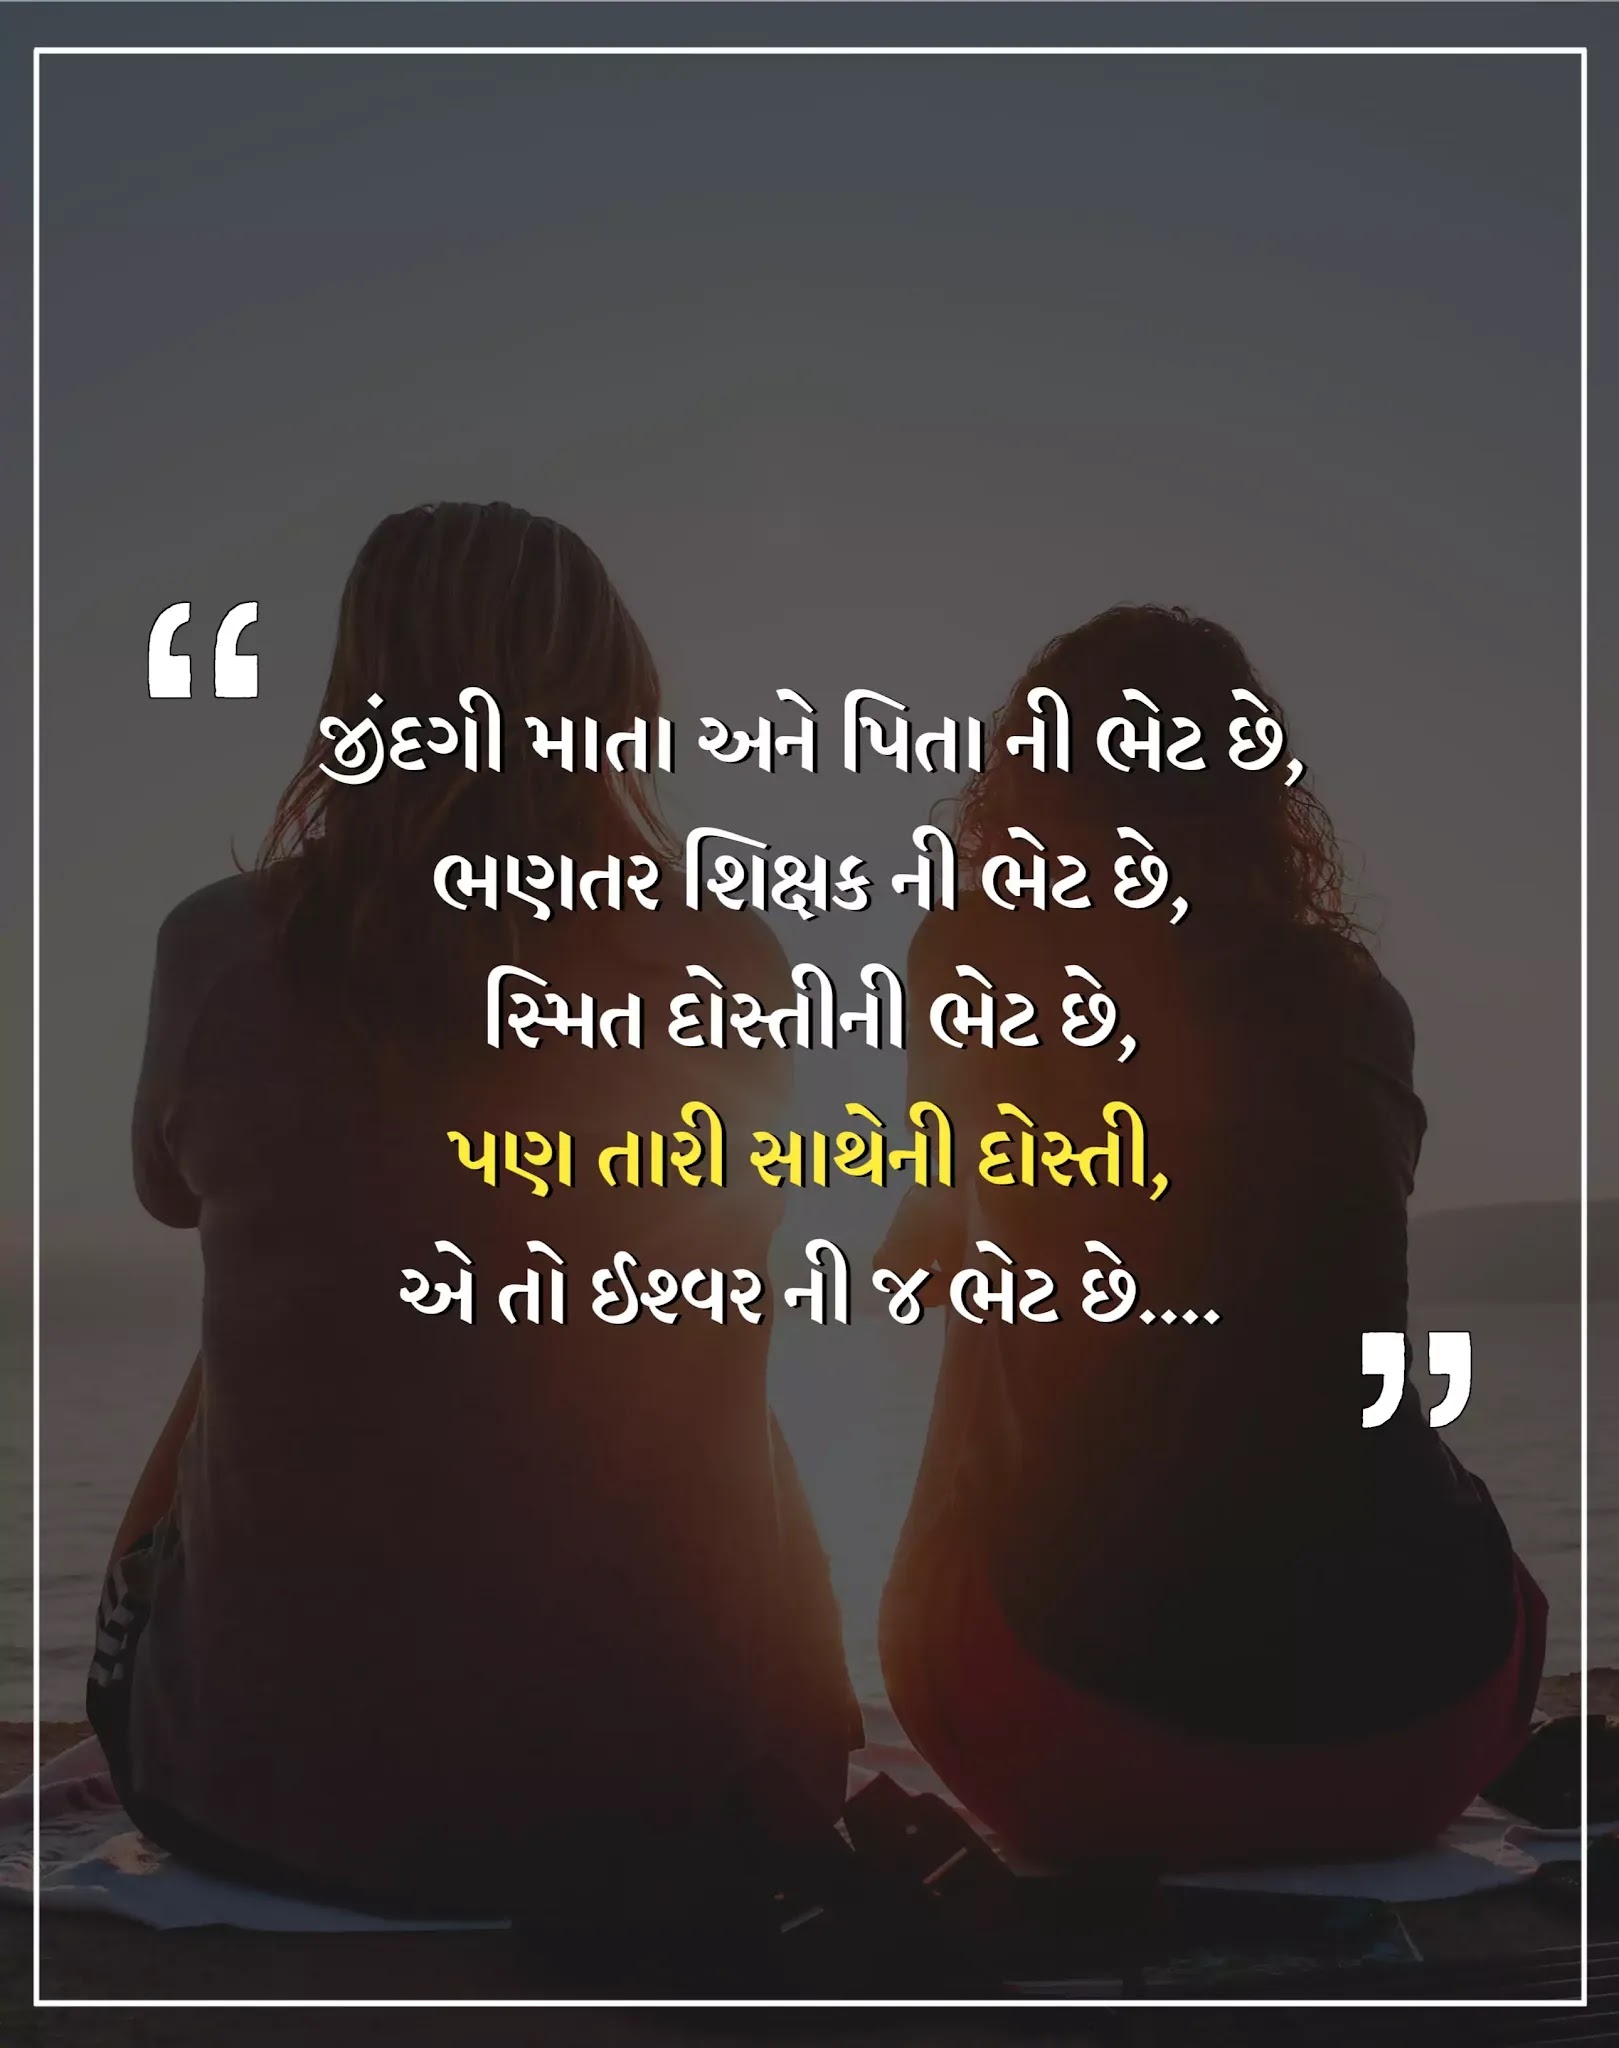 Gujarati Dosti Shayari image to express impotence of friend in our life